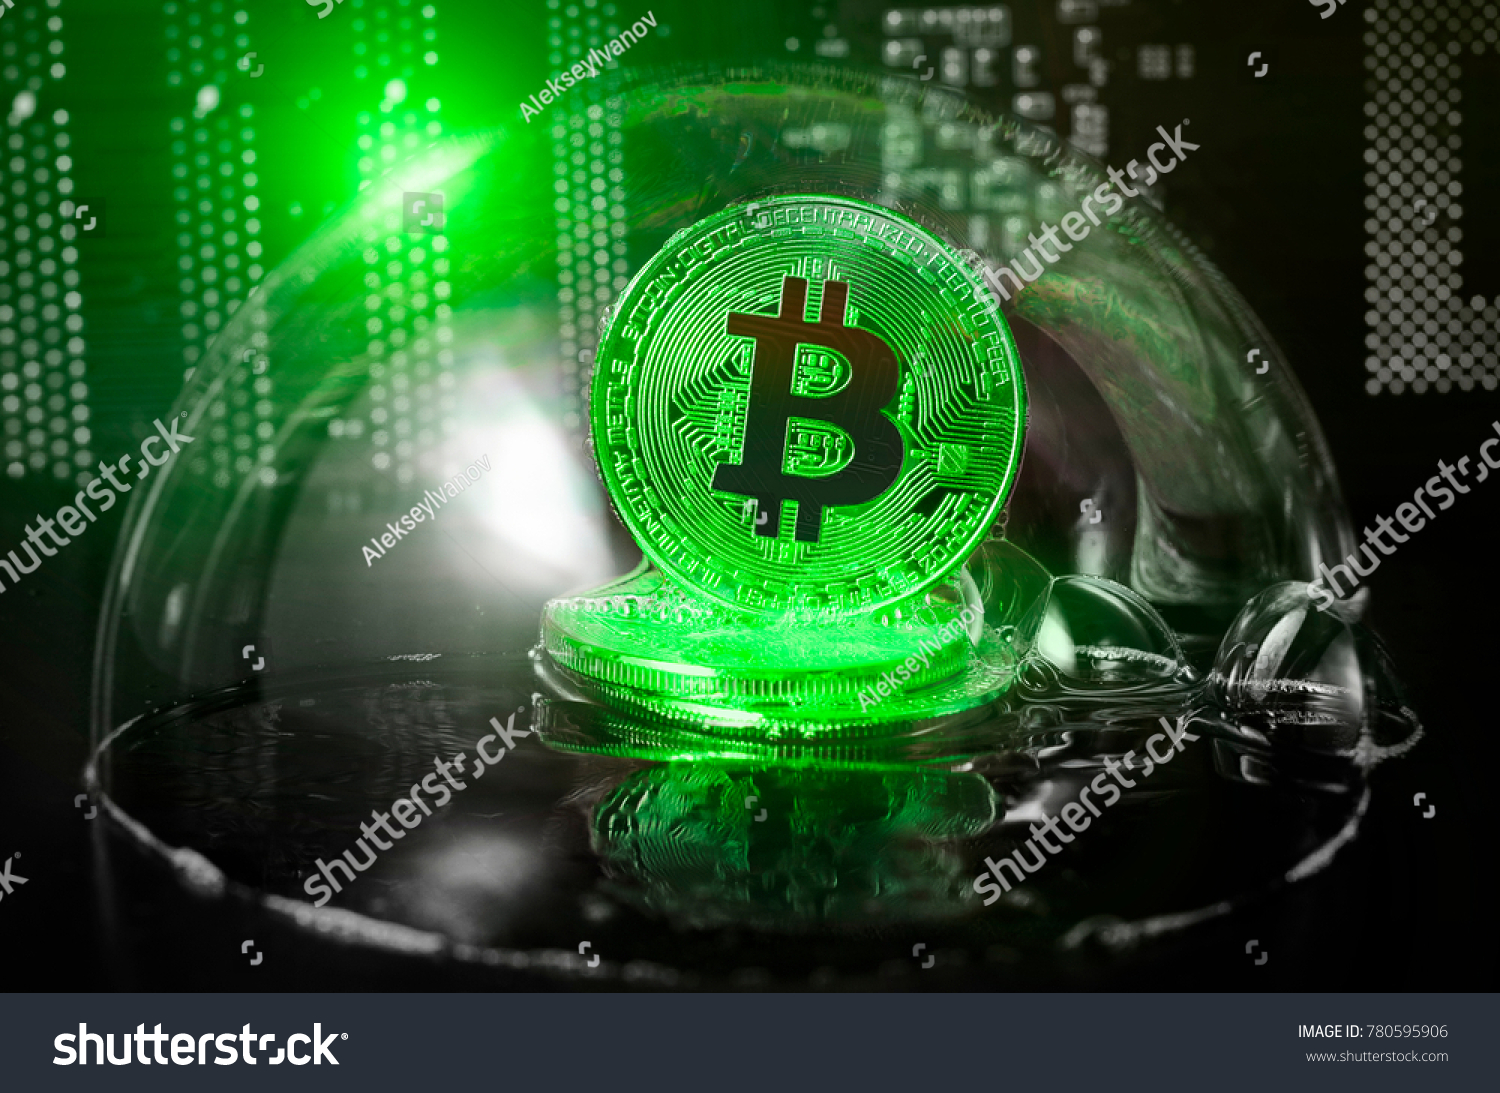 What Is Green Crypto-Currency? - Crypto Currency Bitcoin ...